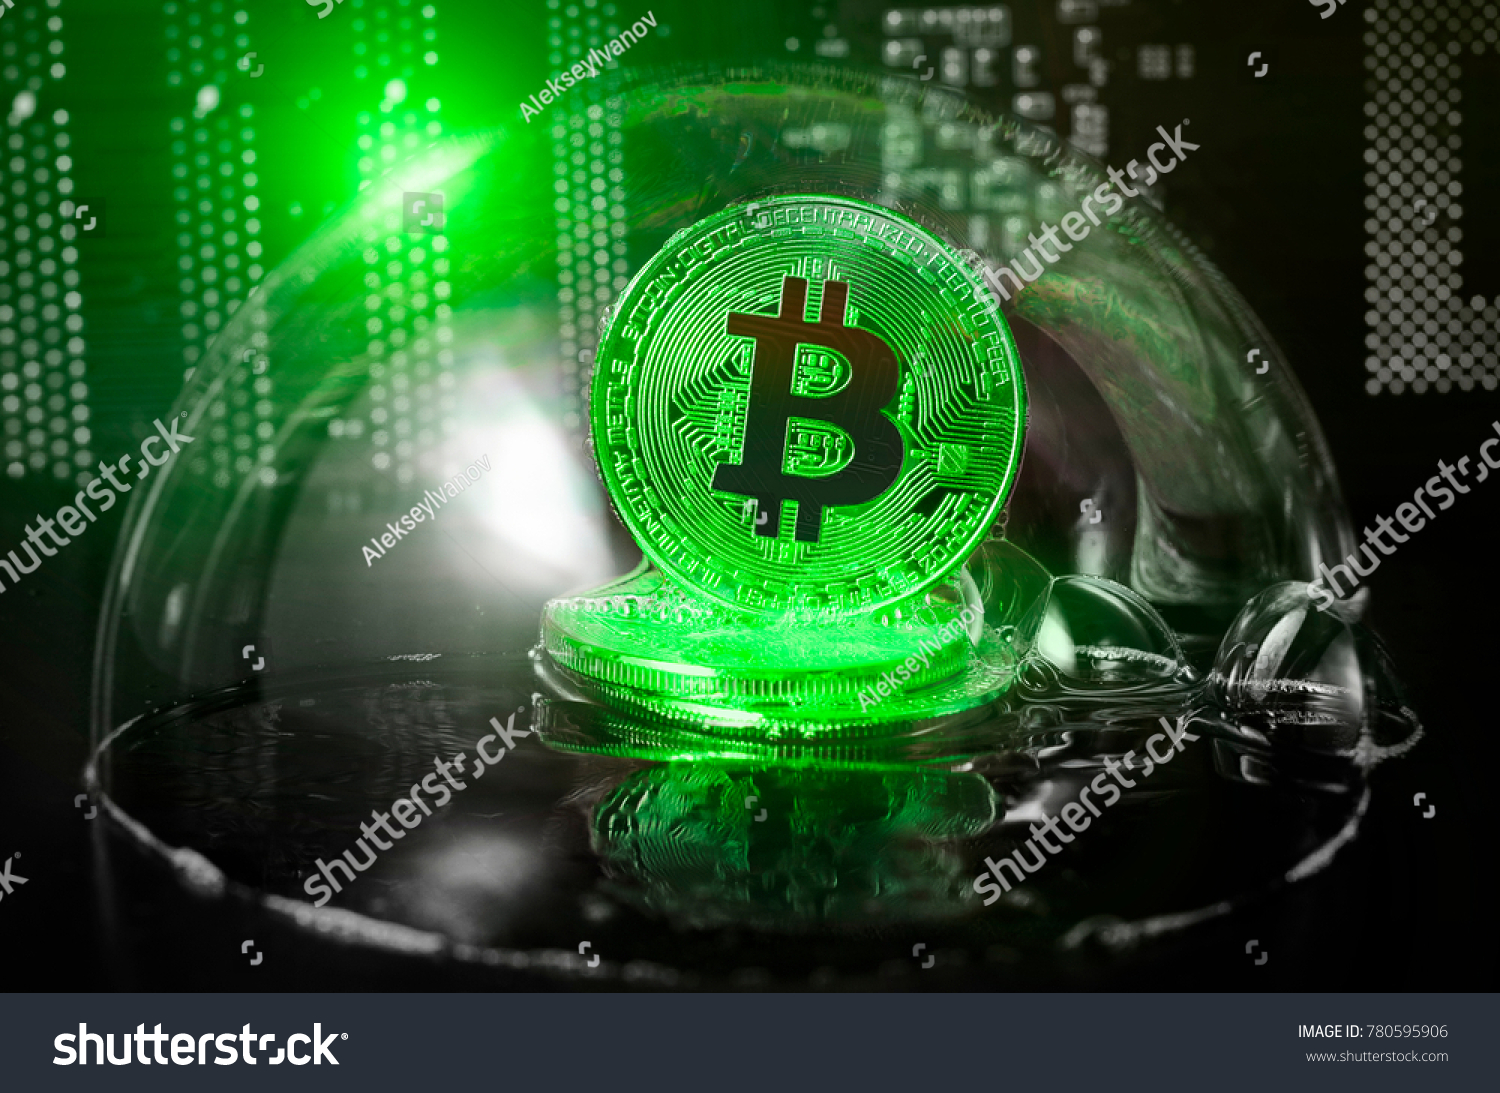 What Is Green Crypto-Currency? - Crypto Currency Bitcoin ...